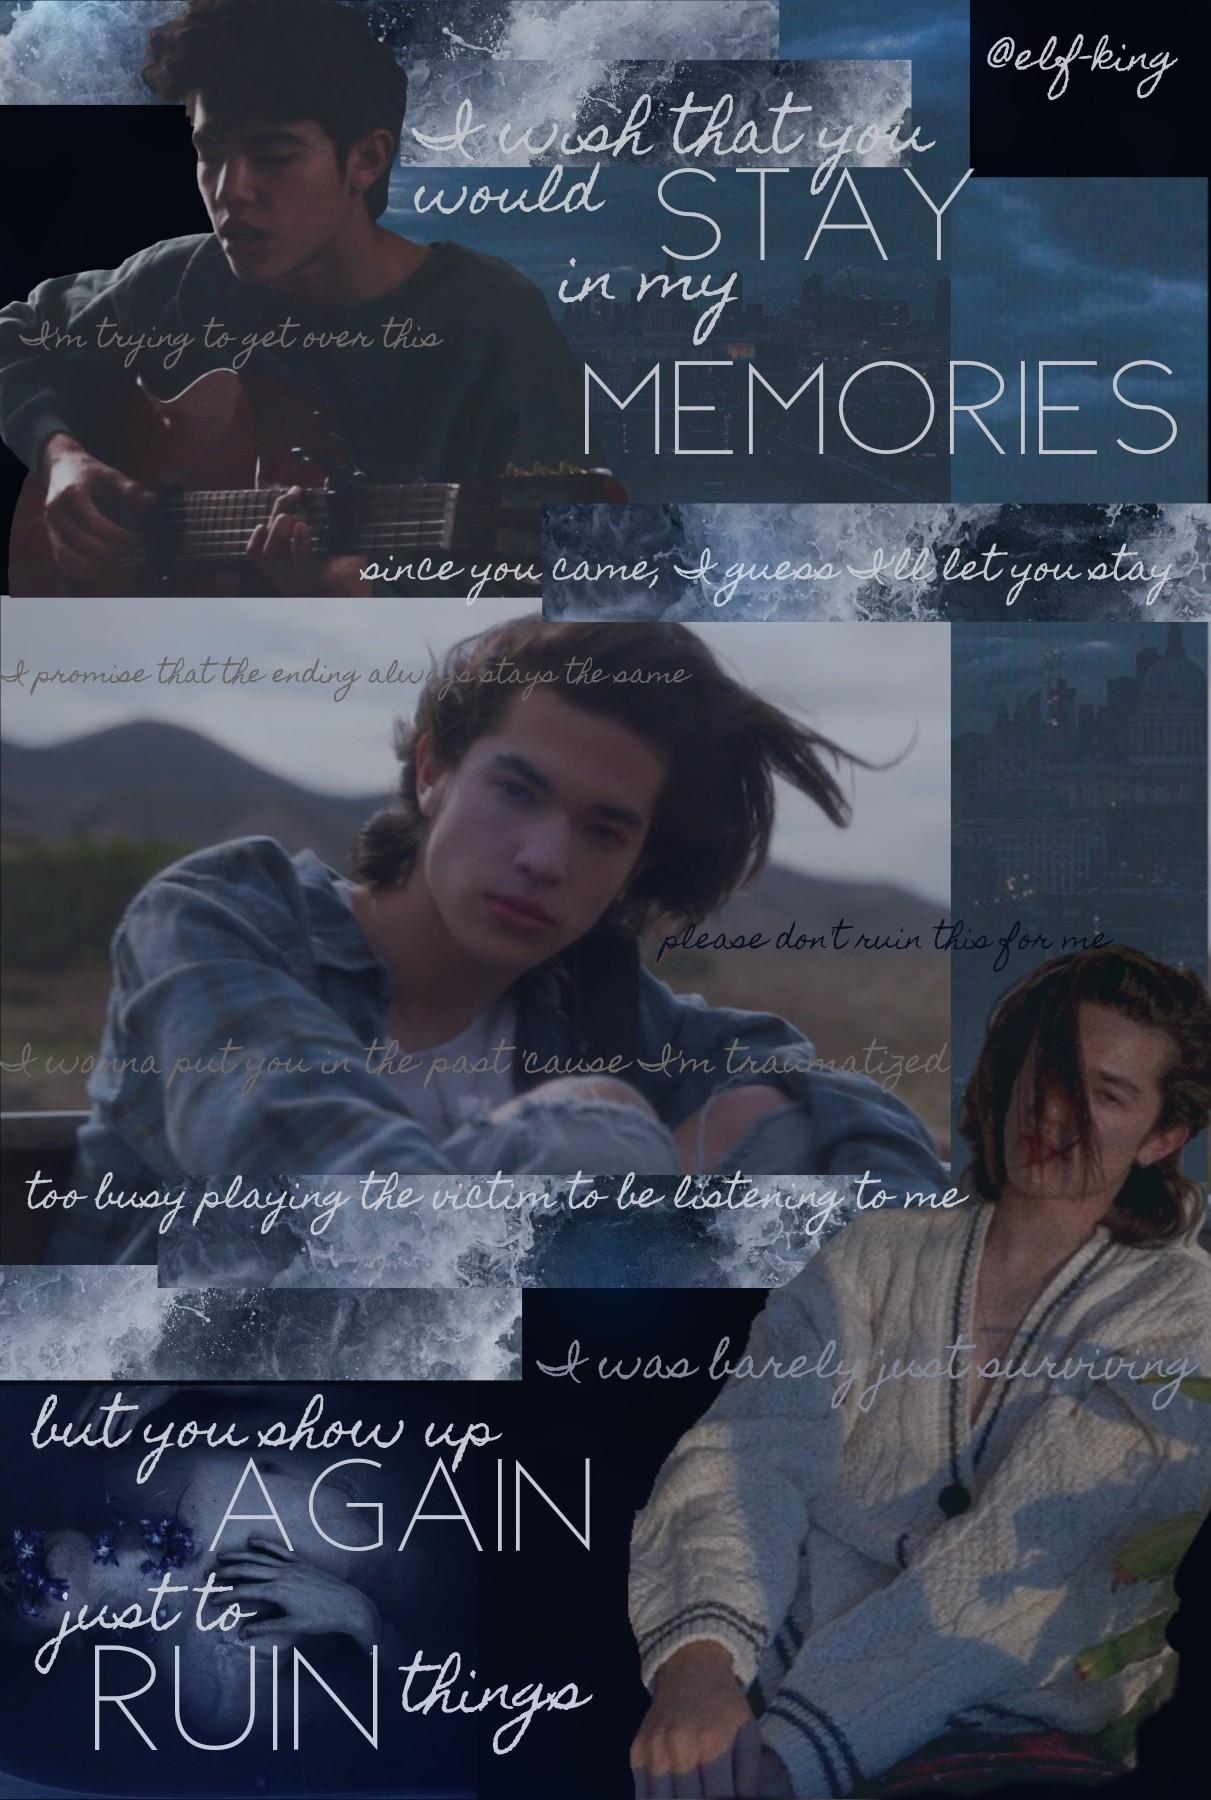 turns out I'm never done making Conan Gray collages, so here's another one!
this was inspired by his song memories, that describes my relationship with way too many people at this point in my life. have an awesome Wednesday!💕